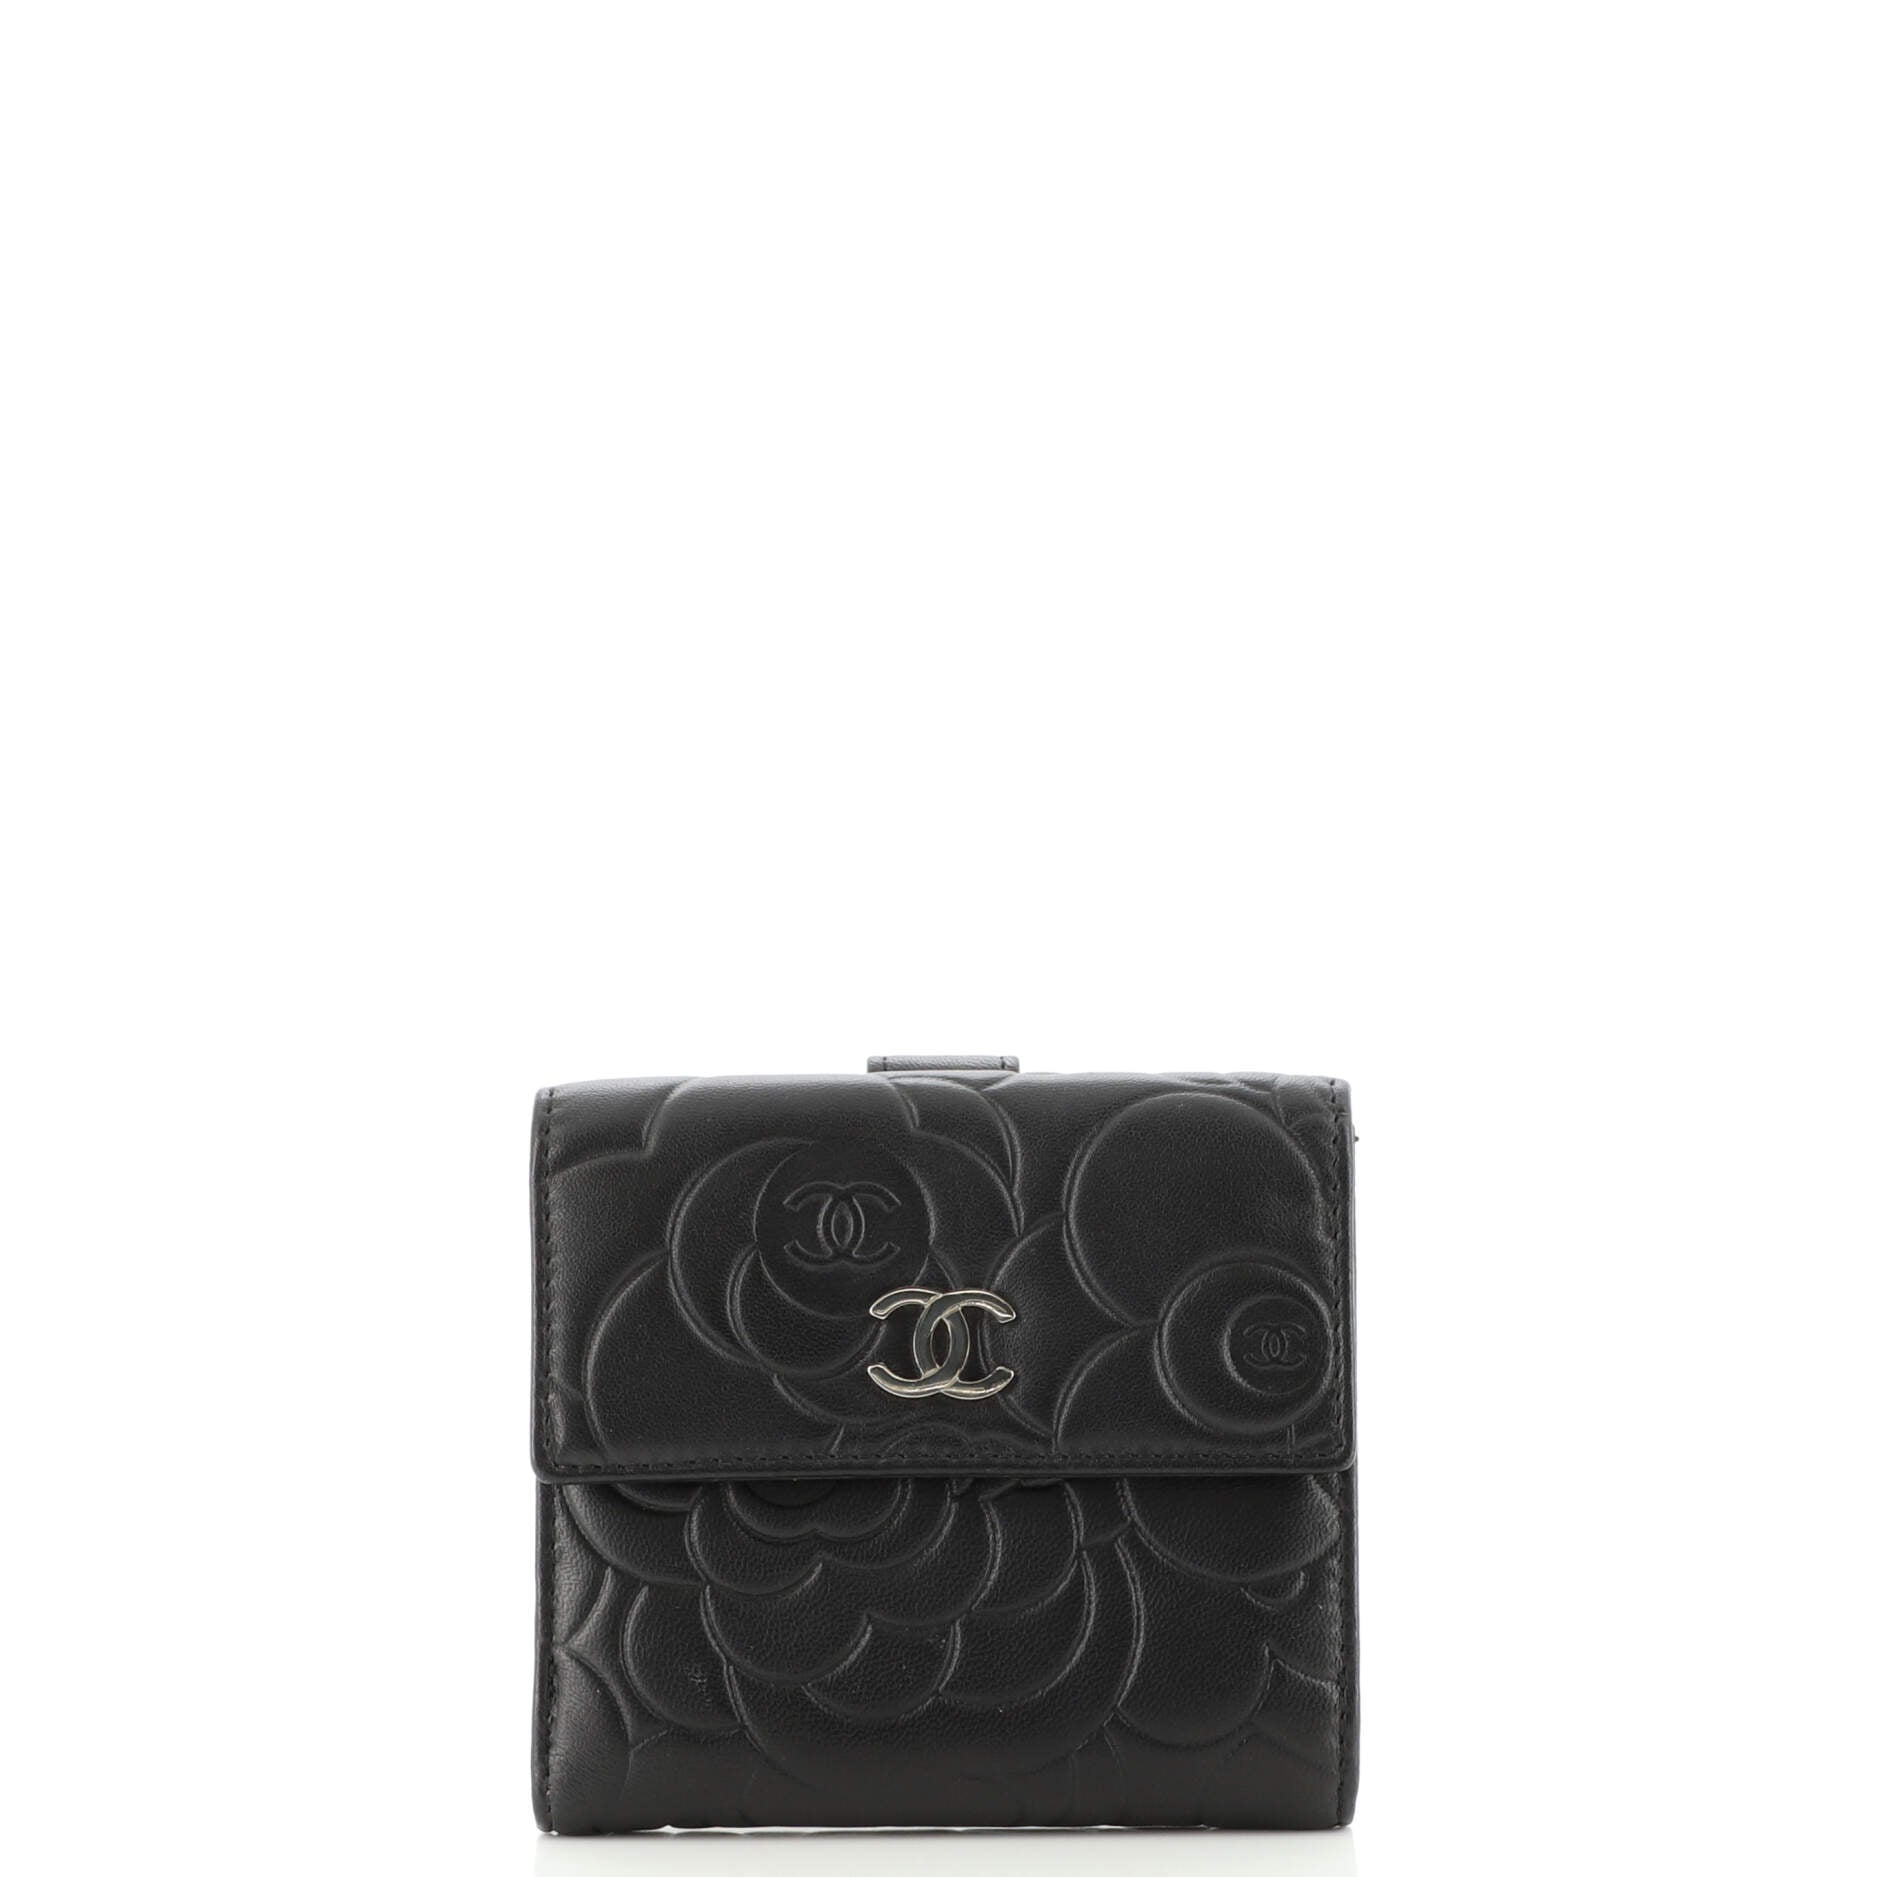 Chanel Classic Long Wallet in Quilted Lambskin Leather, Bi-Fold